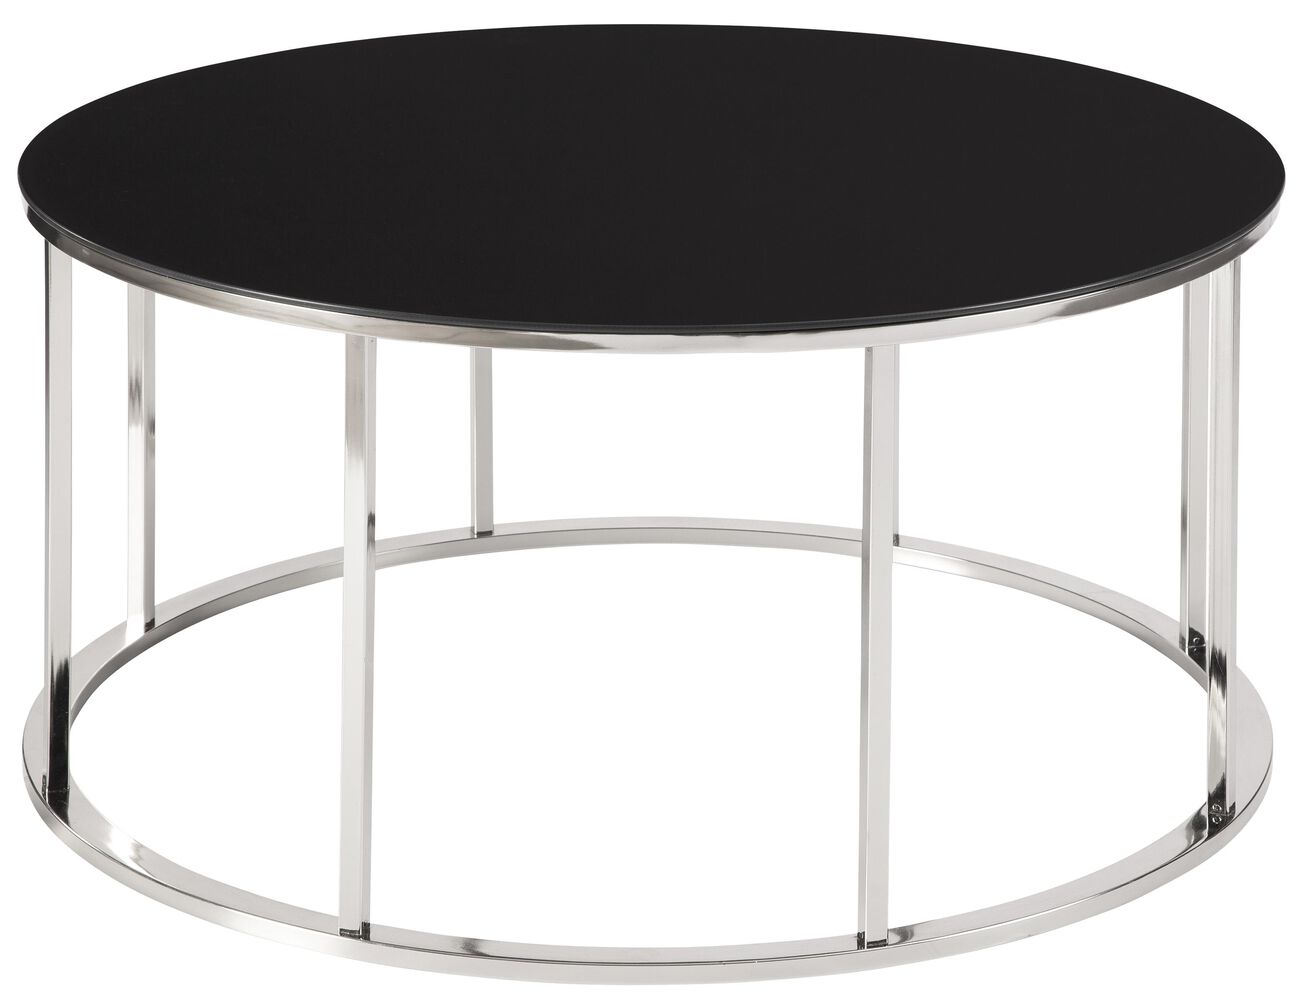 Round Tempered Glass Top Cocktail Table with Metal Frame, Black and Chrome